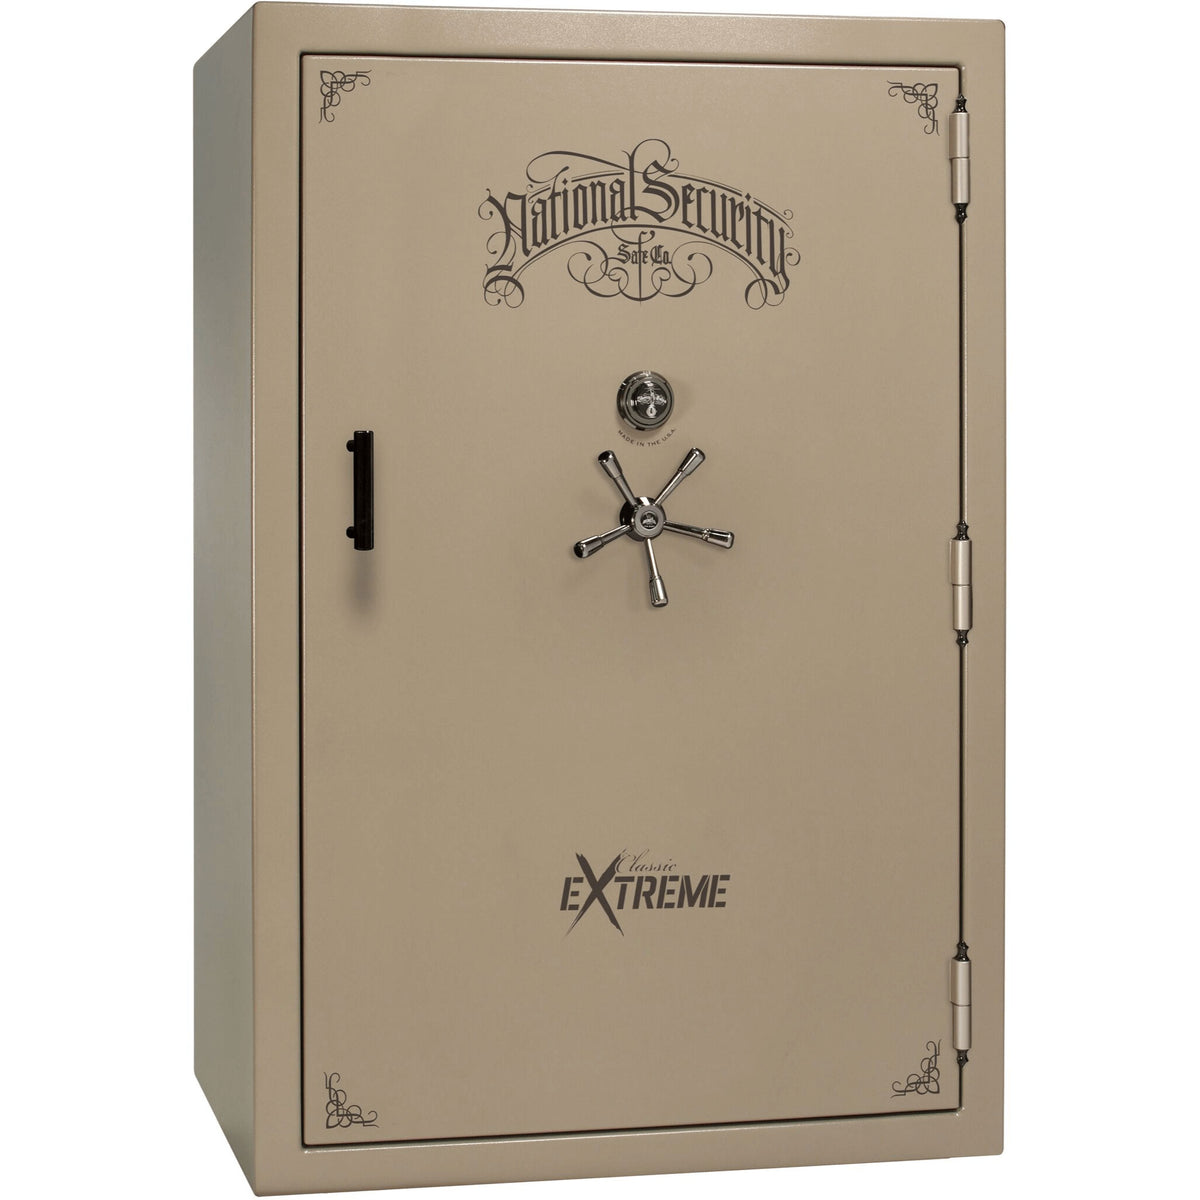 Liberty Classic Select Extreme Wide Body Safe in Champagne Marble with Black Chrome Mechanical Lock.